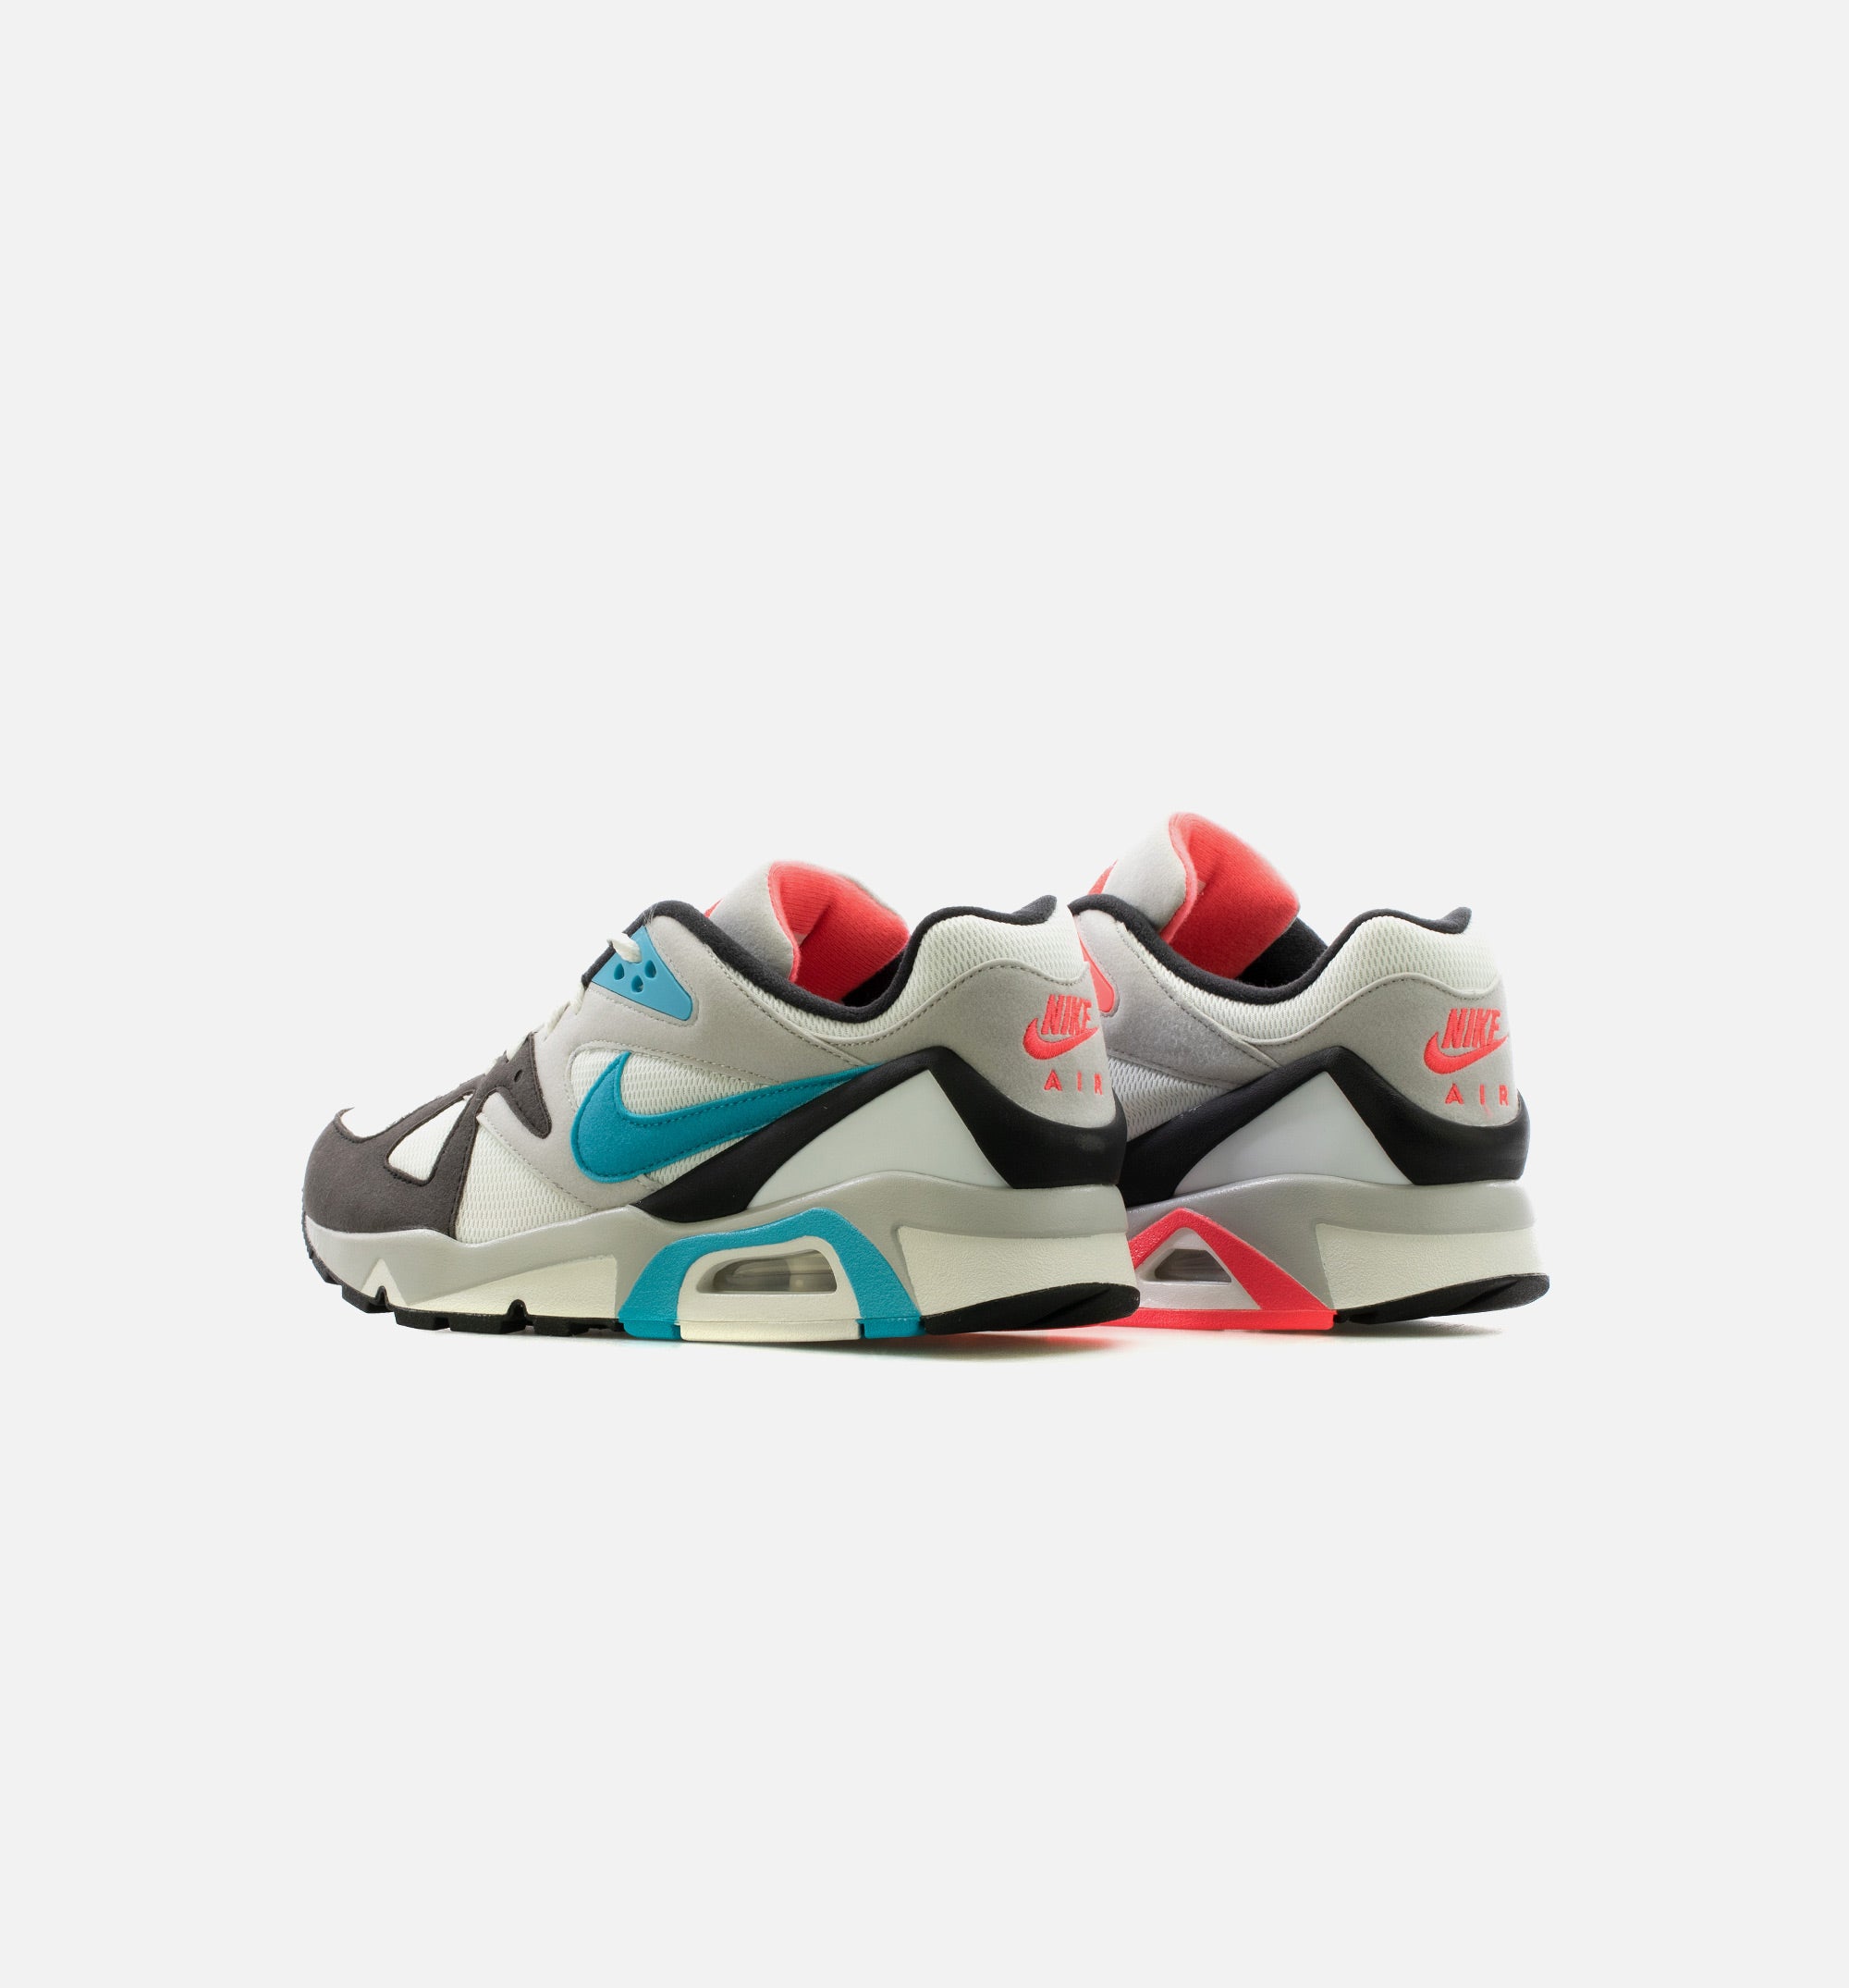 🔴 Nike Air Structure Triax 91 Turquoise White Pink Black Men's 13  2009